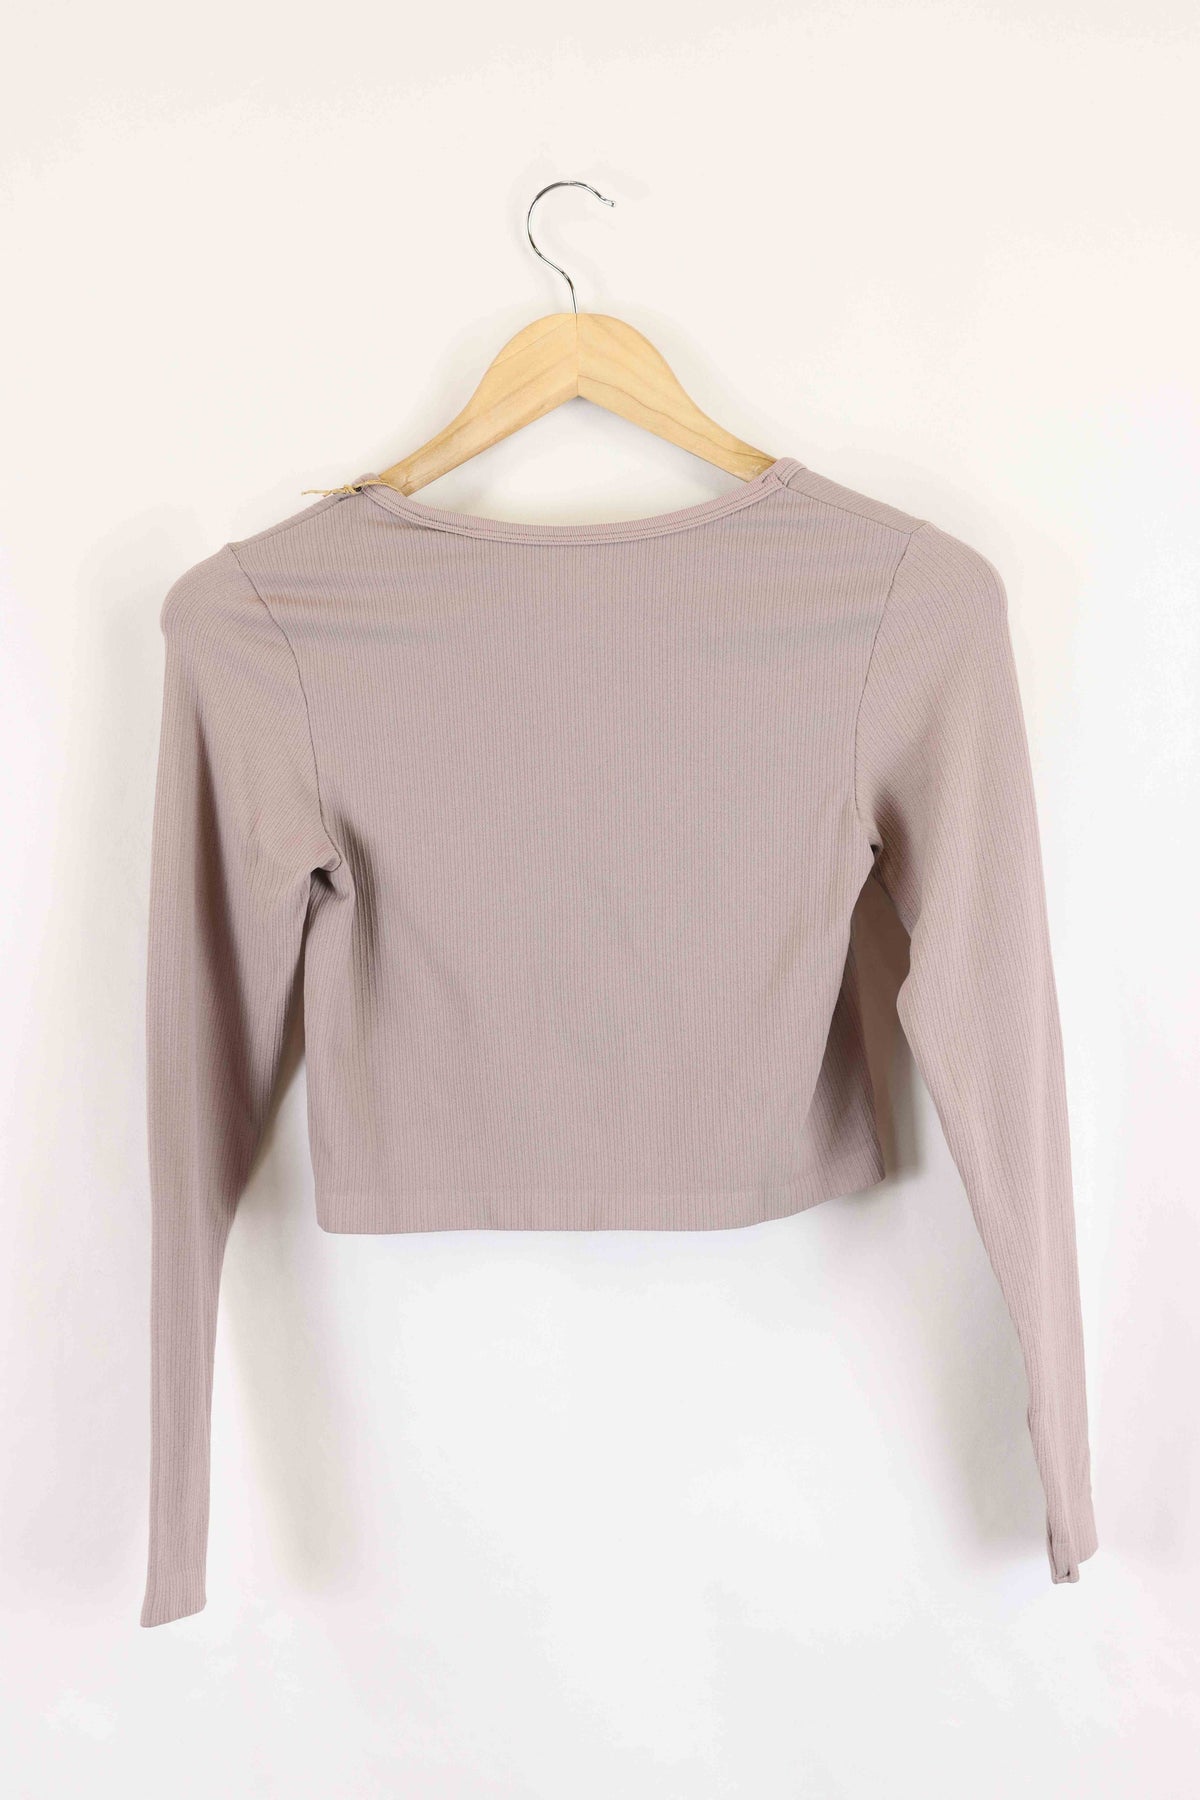 H&amp;M Purple Long Sleeve Cropped Top M